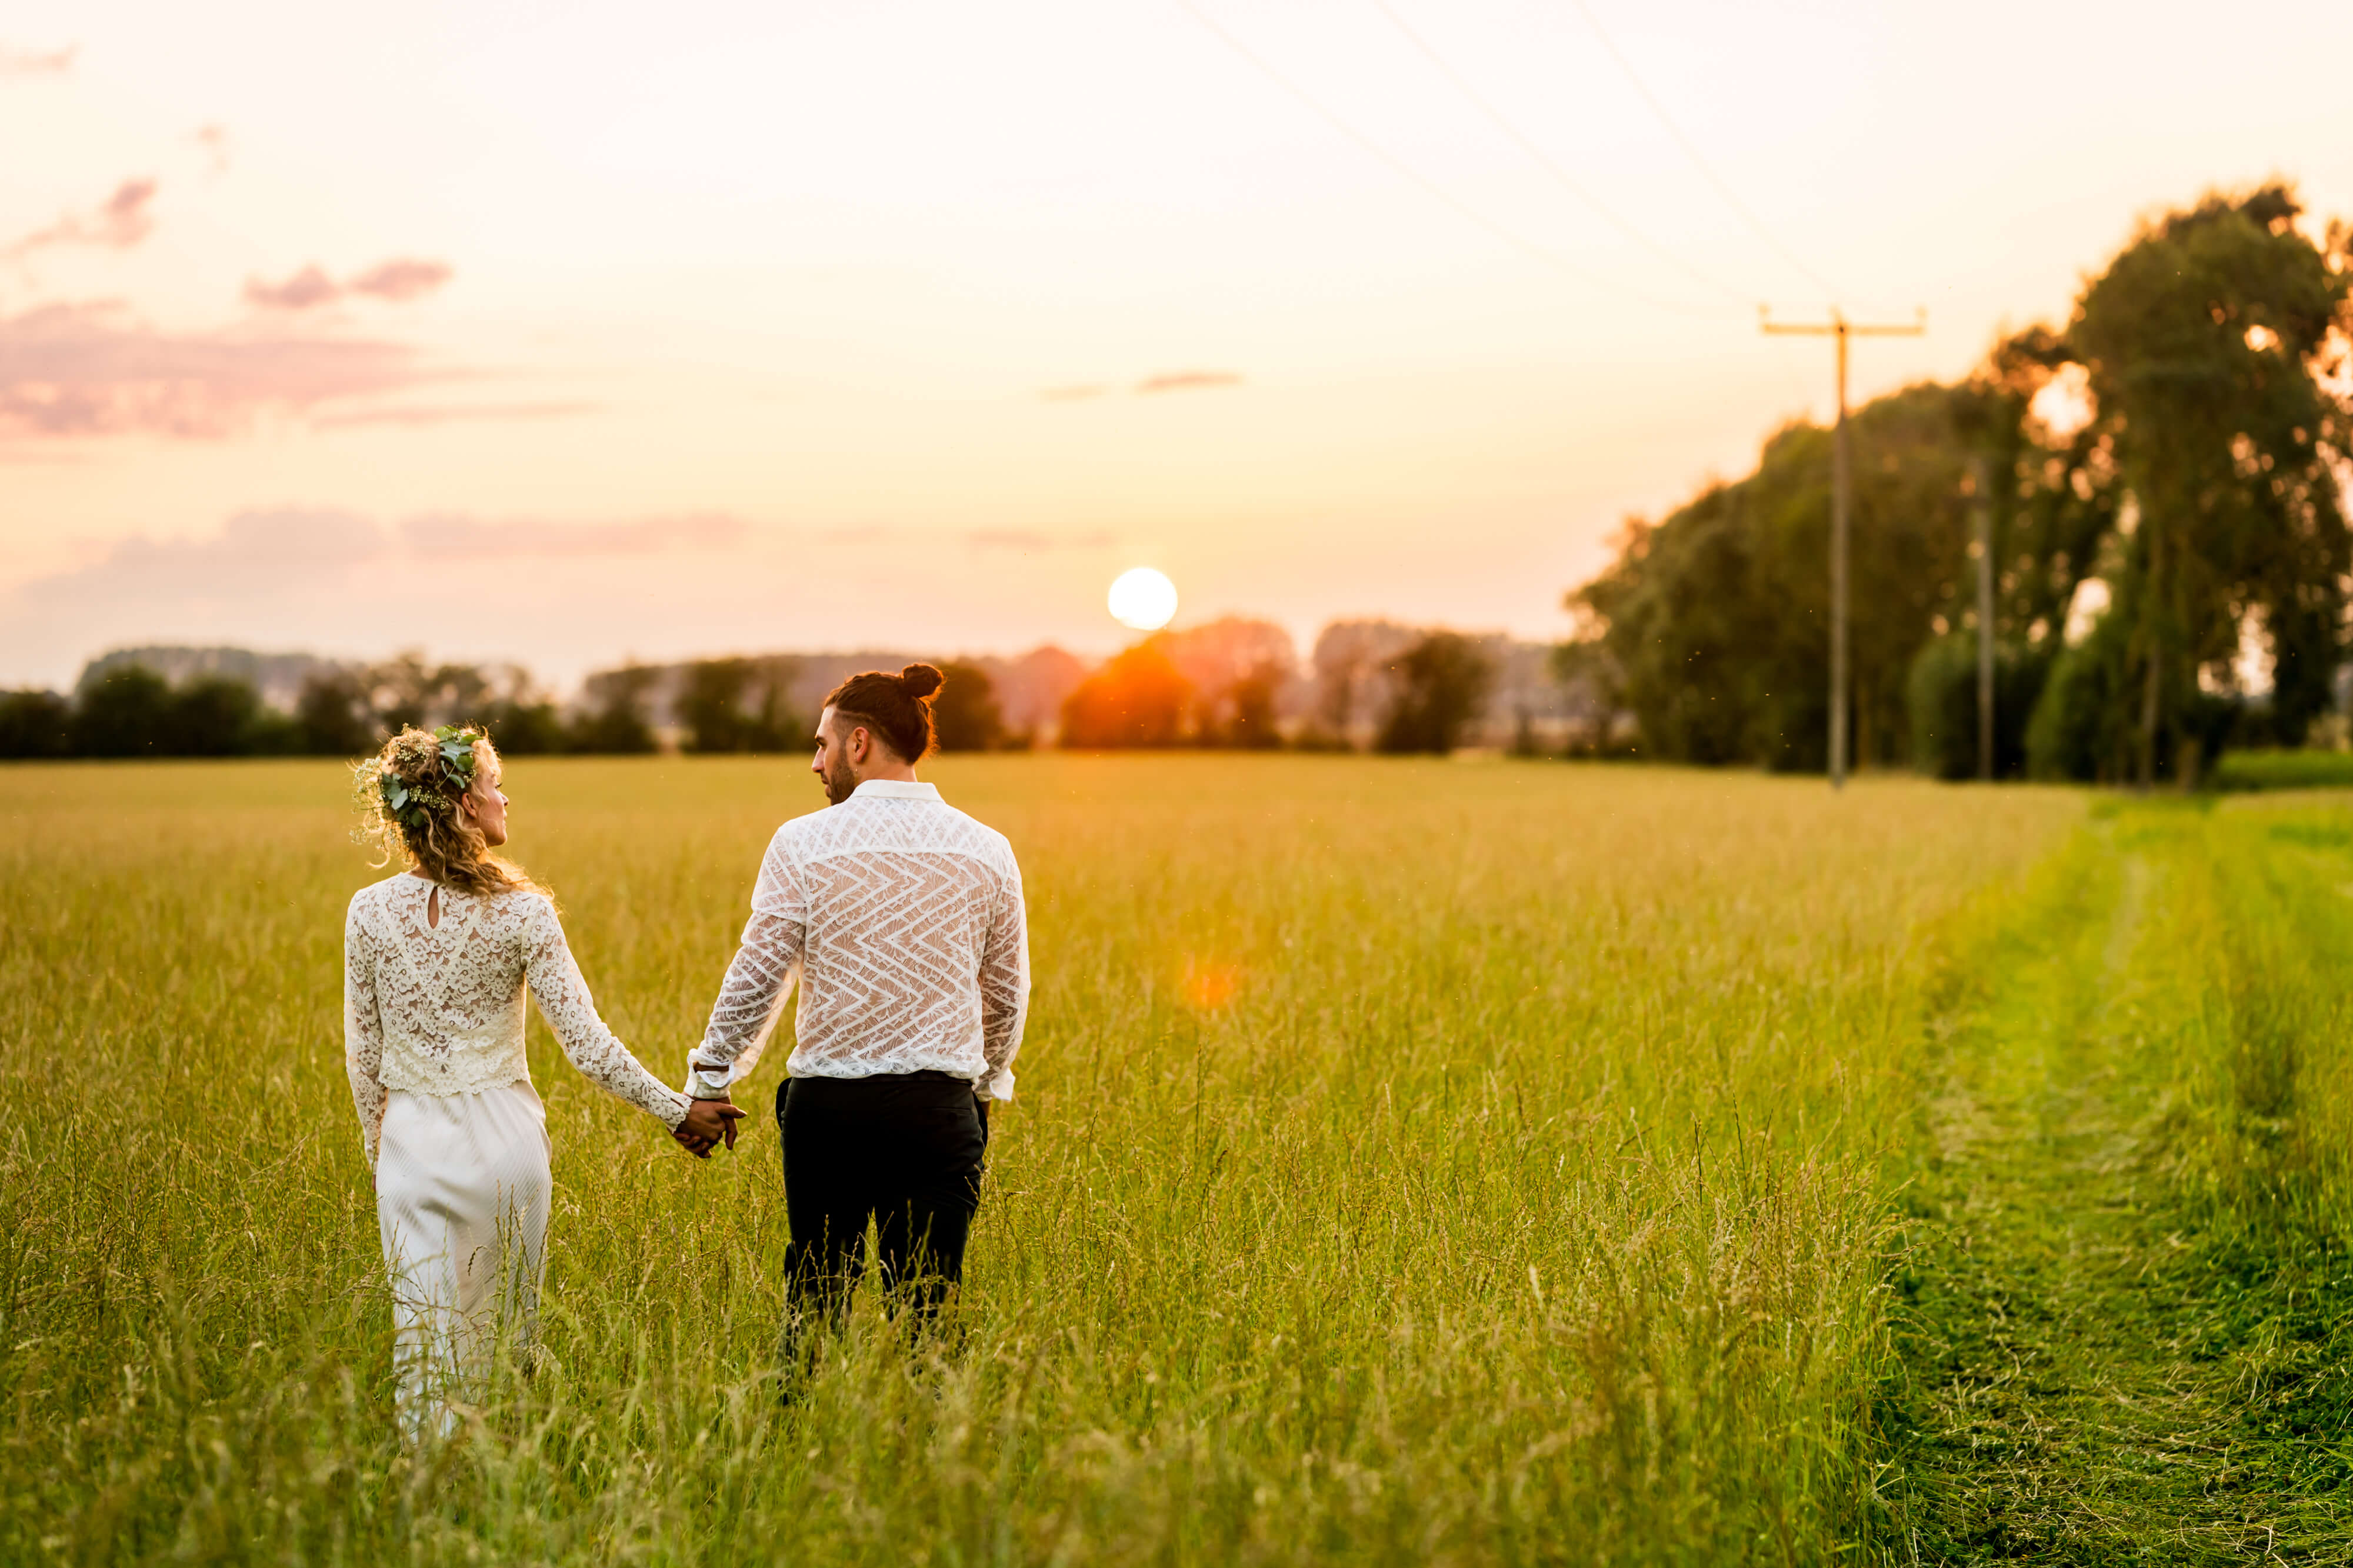 Couple holding hands in sunset field.